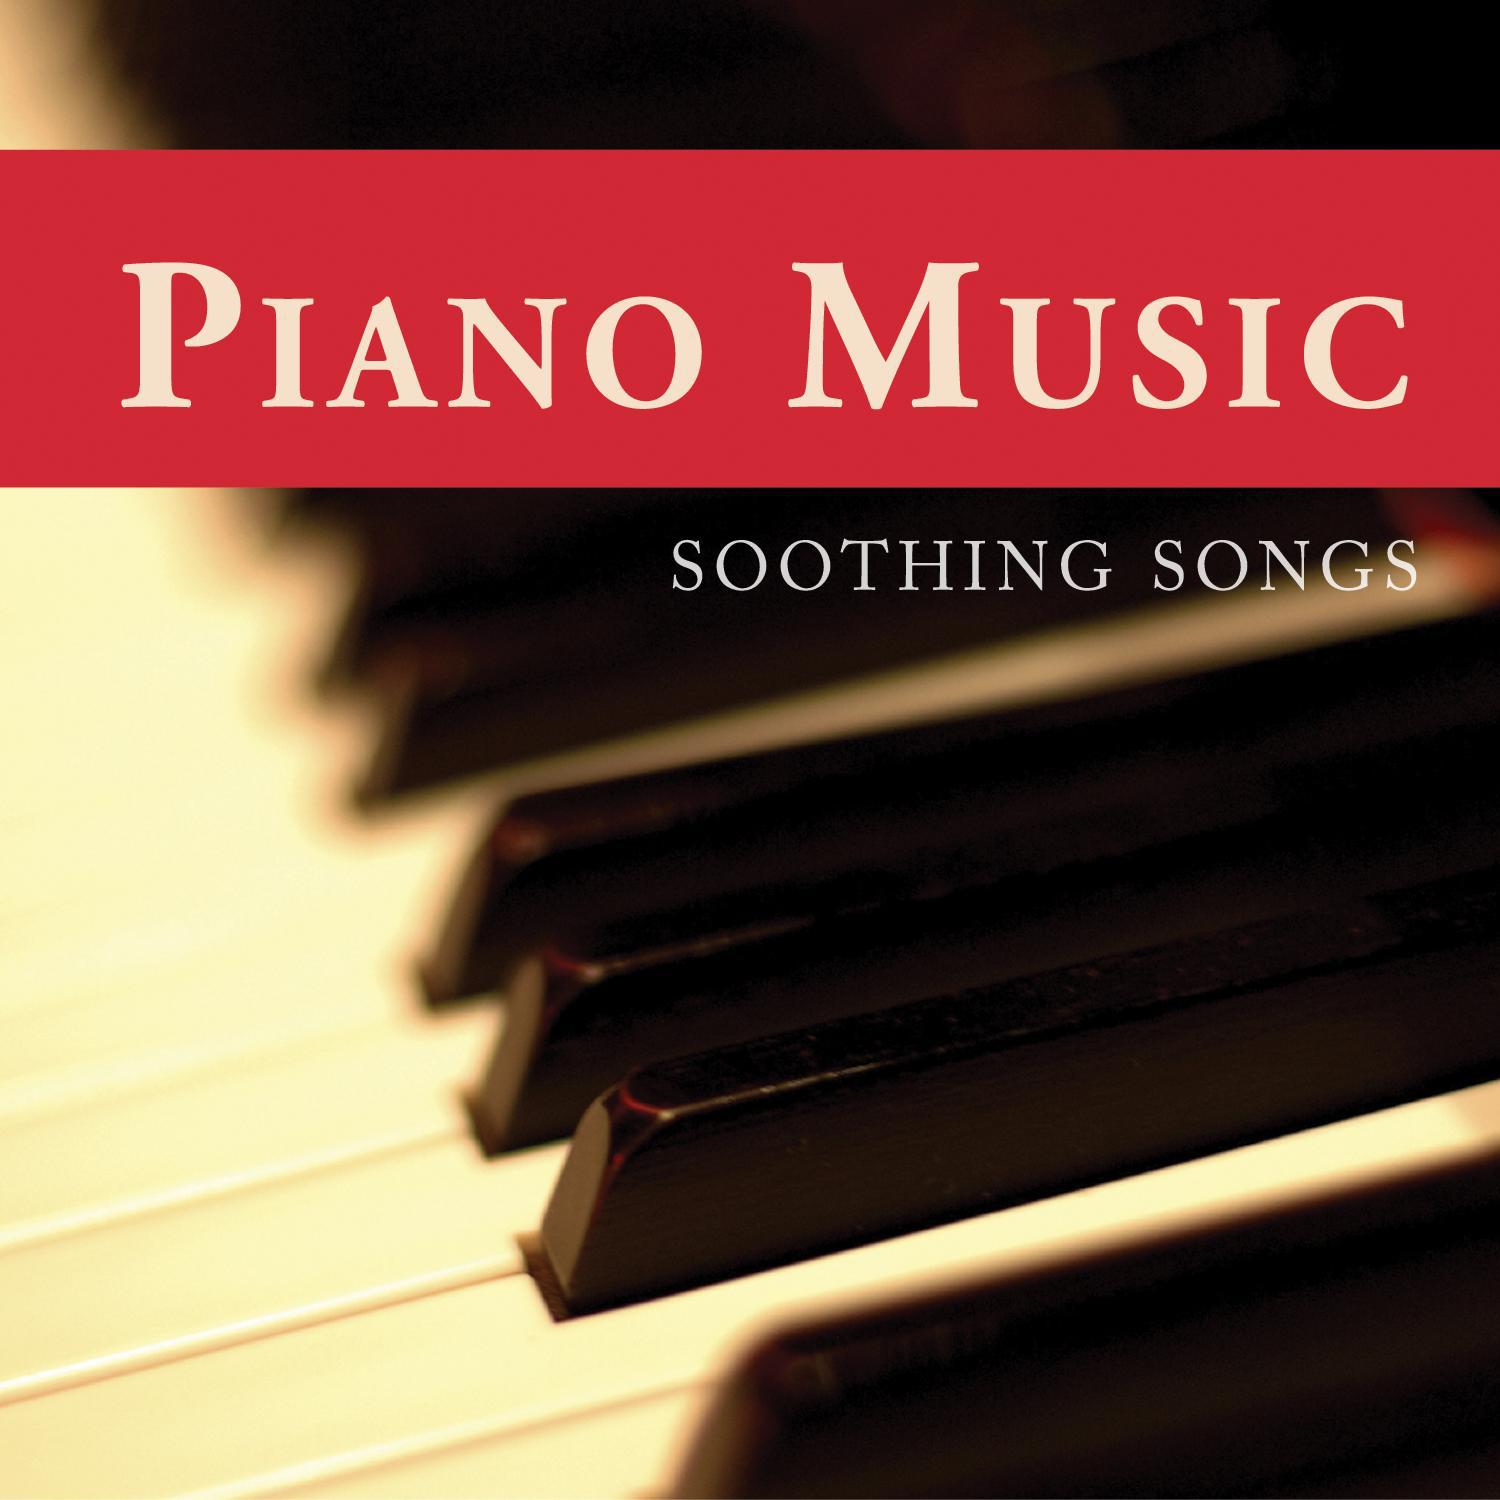 Piano Music: Soothing Songs